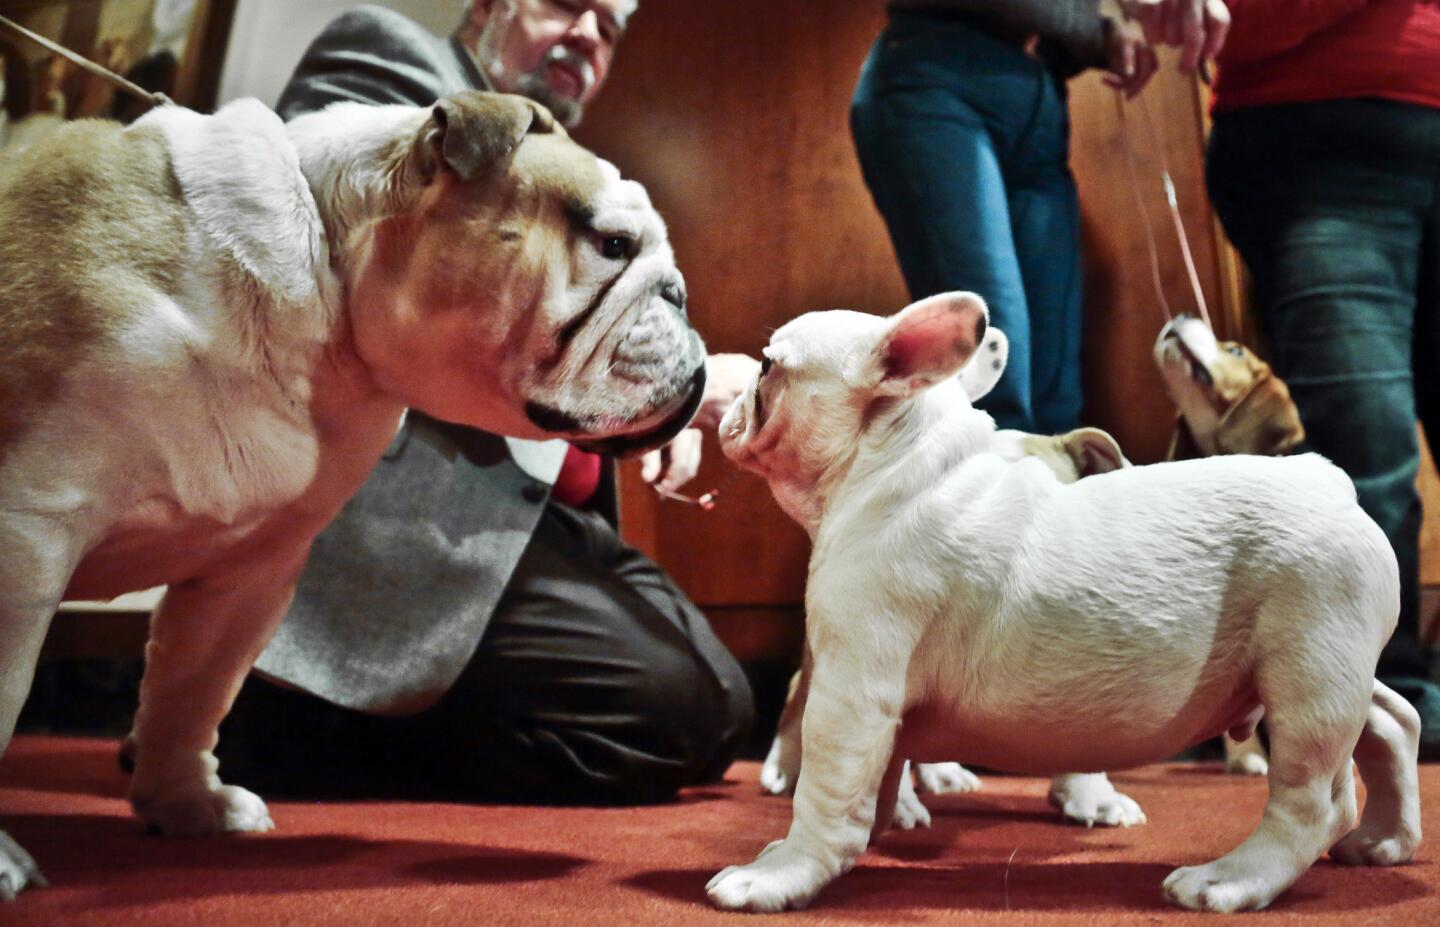 English bulldog Cassidy, left, of Smithtown, N.Y., and French bulldog puppy Snowman of Boston face each other during a news conference on in New York.